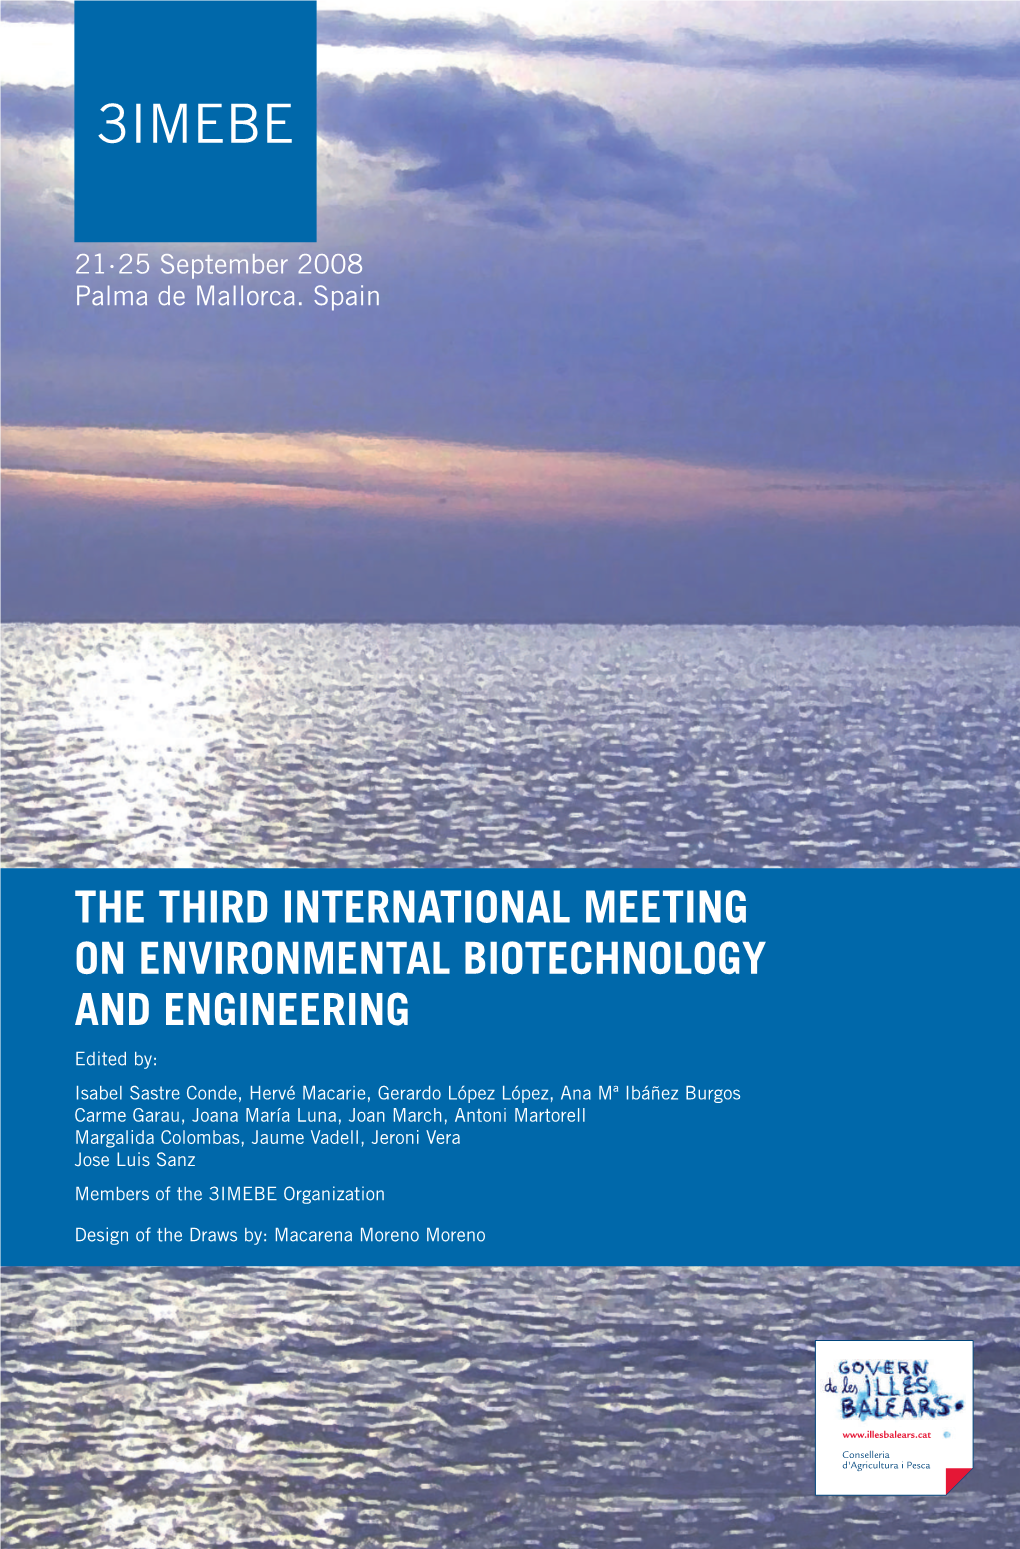 The Third International Meeting on Environmental Biotechnology and Engineering